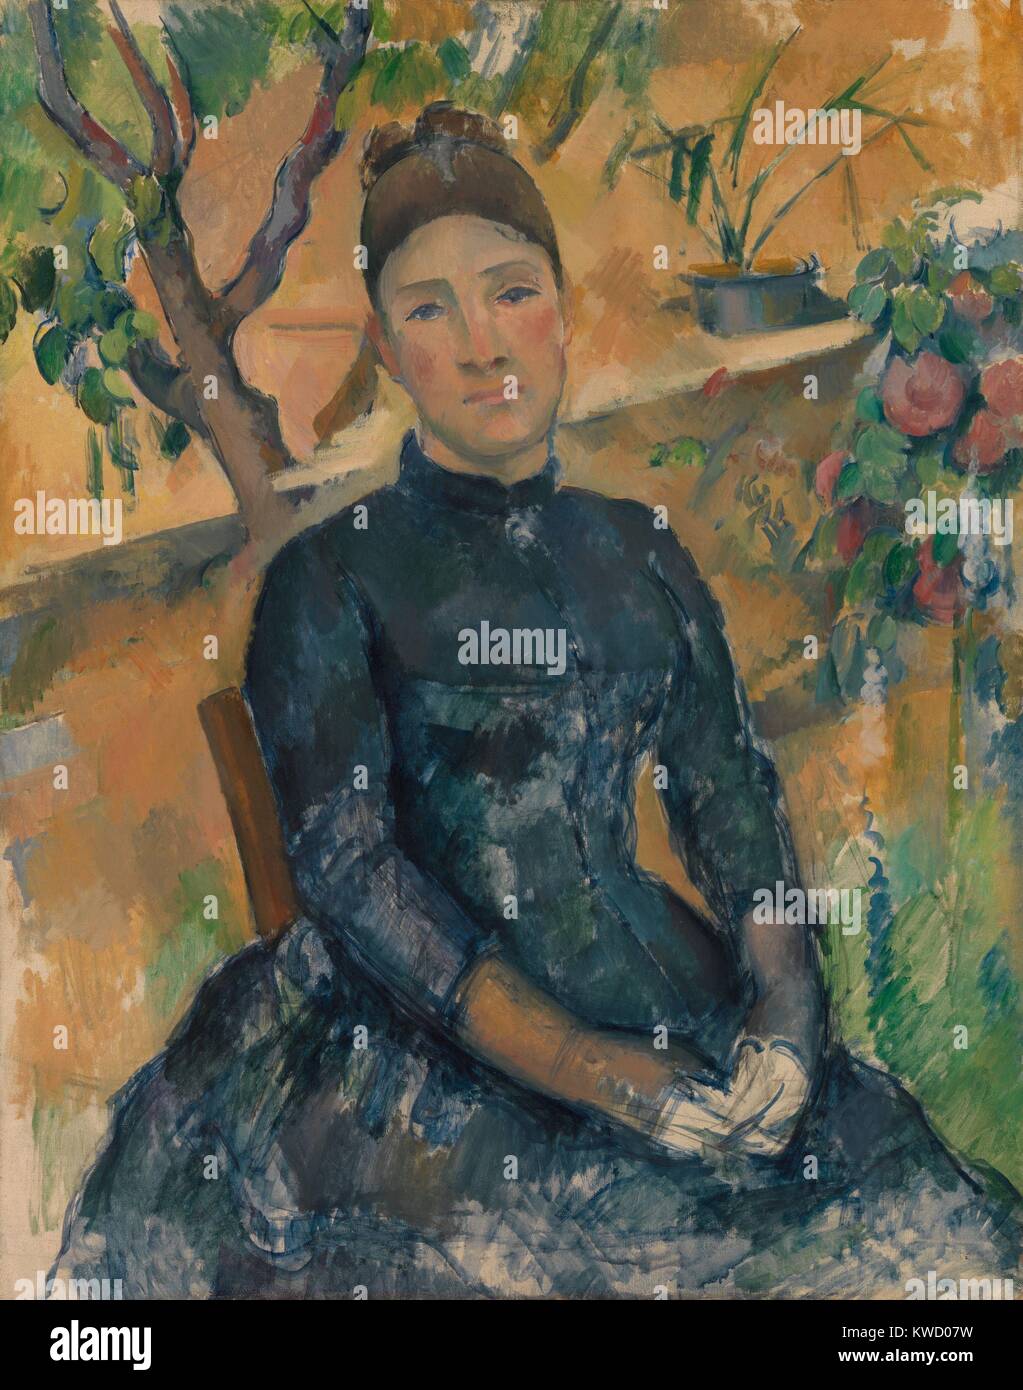 Madame Cezanne, by Paul Cezanne, 1891, French Post-Impressionist painting, oil on canvas. The painting is most developed in and around the head and shoulders, with the hands and lower areas sketched in (BSLOC 2017 5 18) Stock Photo